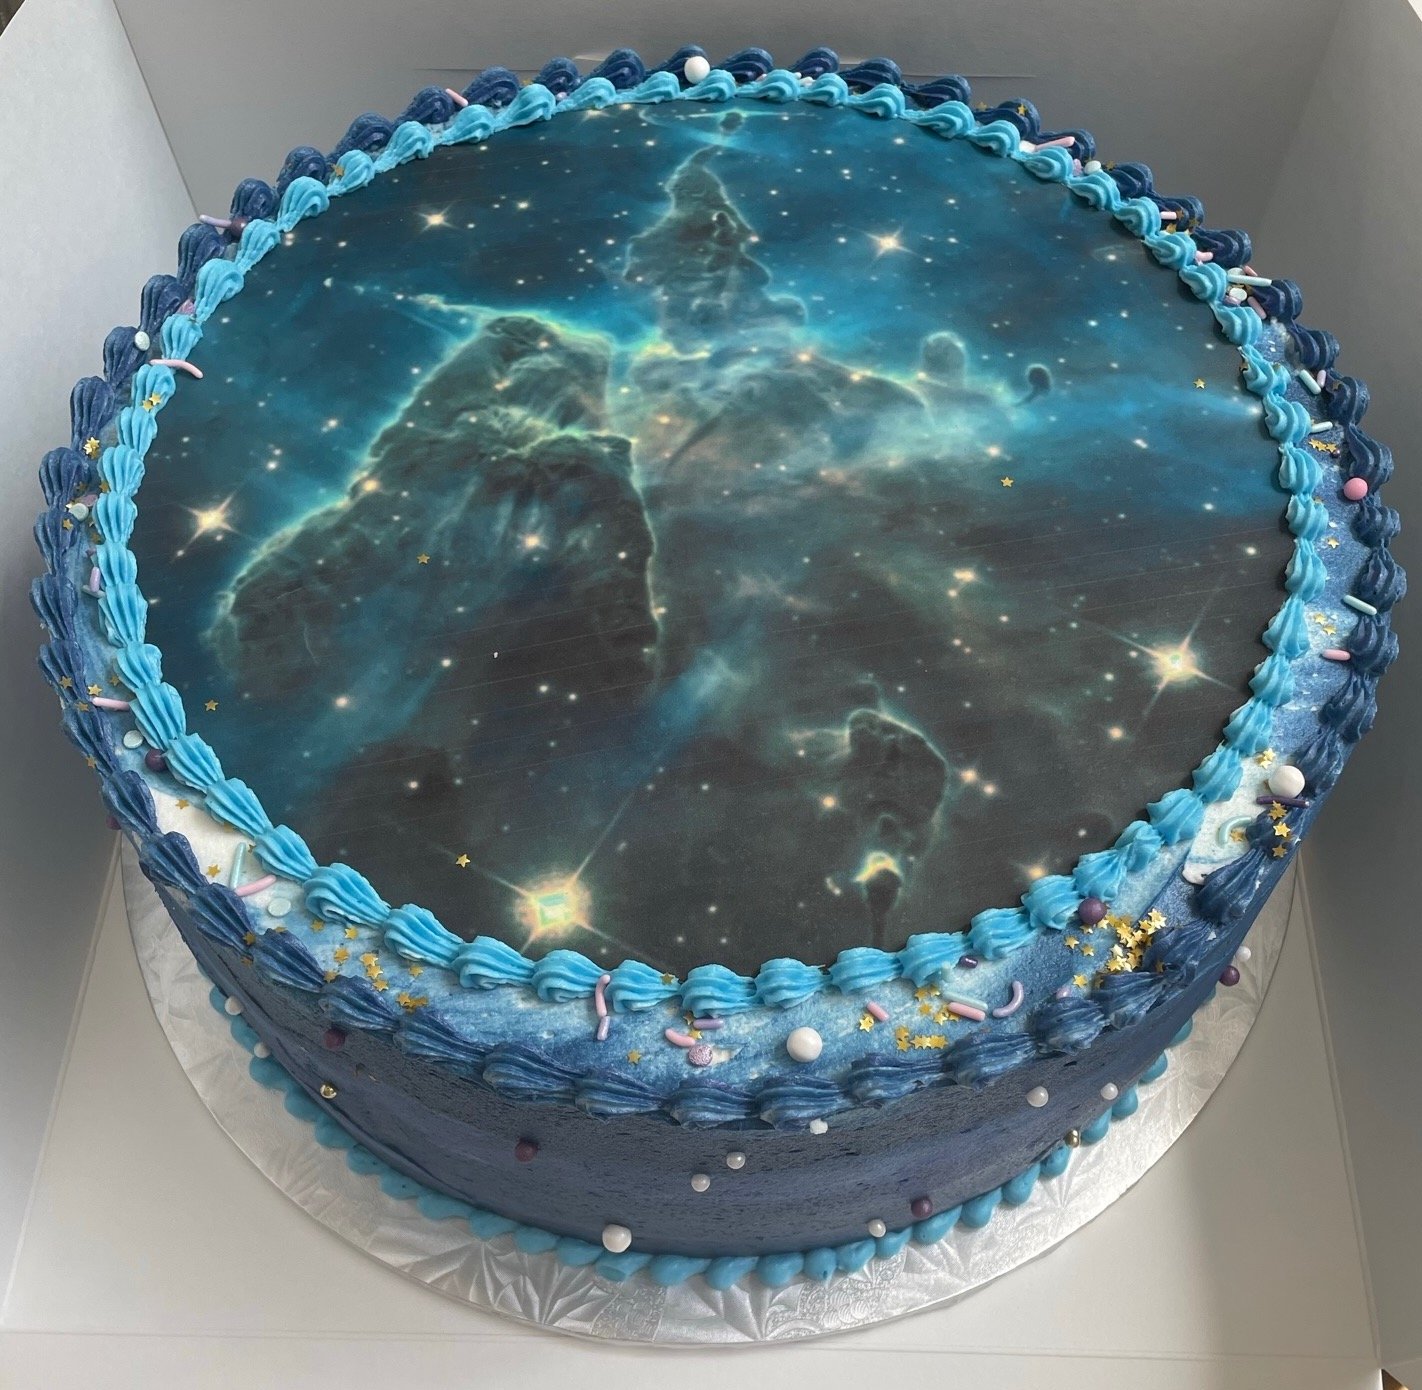 Outer Space Photo Cake